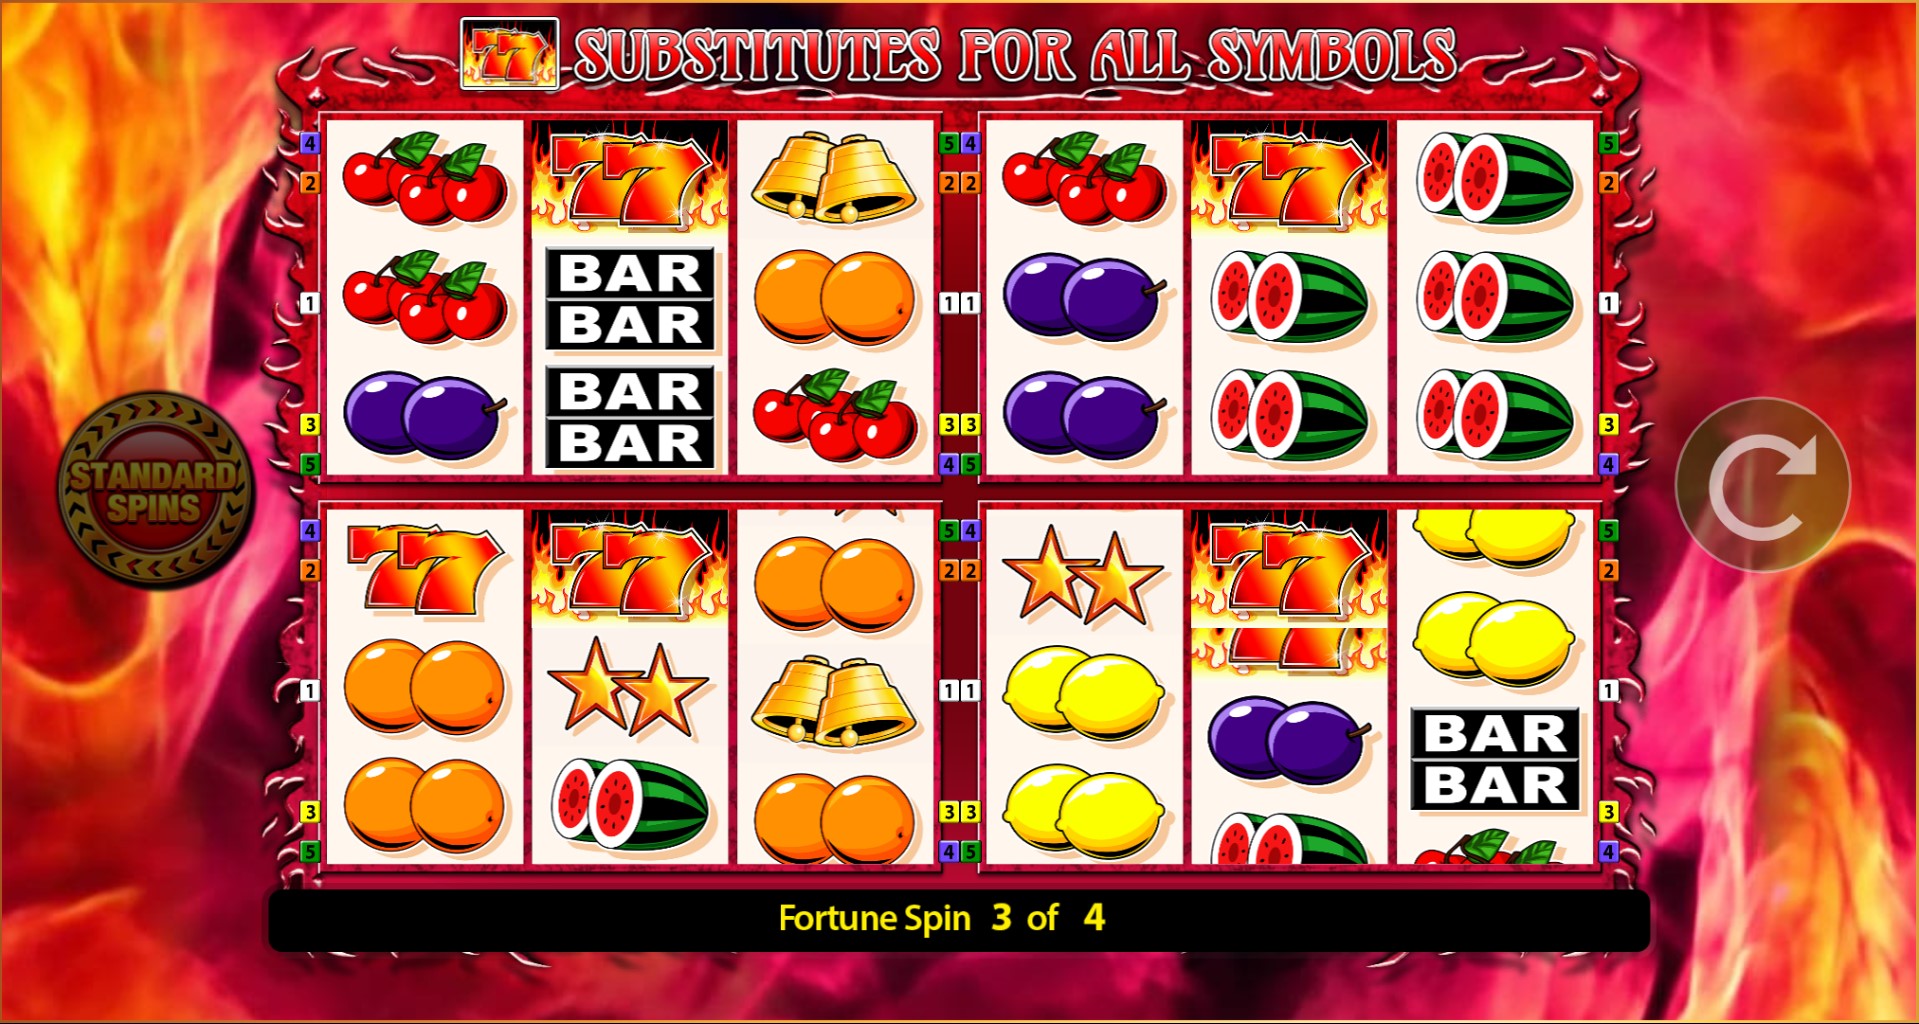 7S DELUXE FORTUNE SPINS